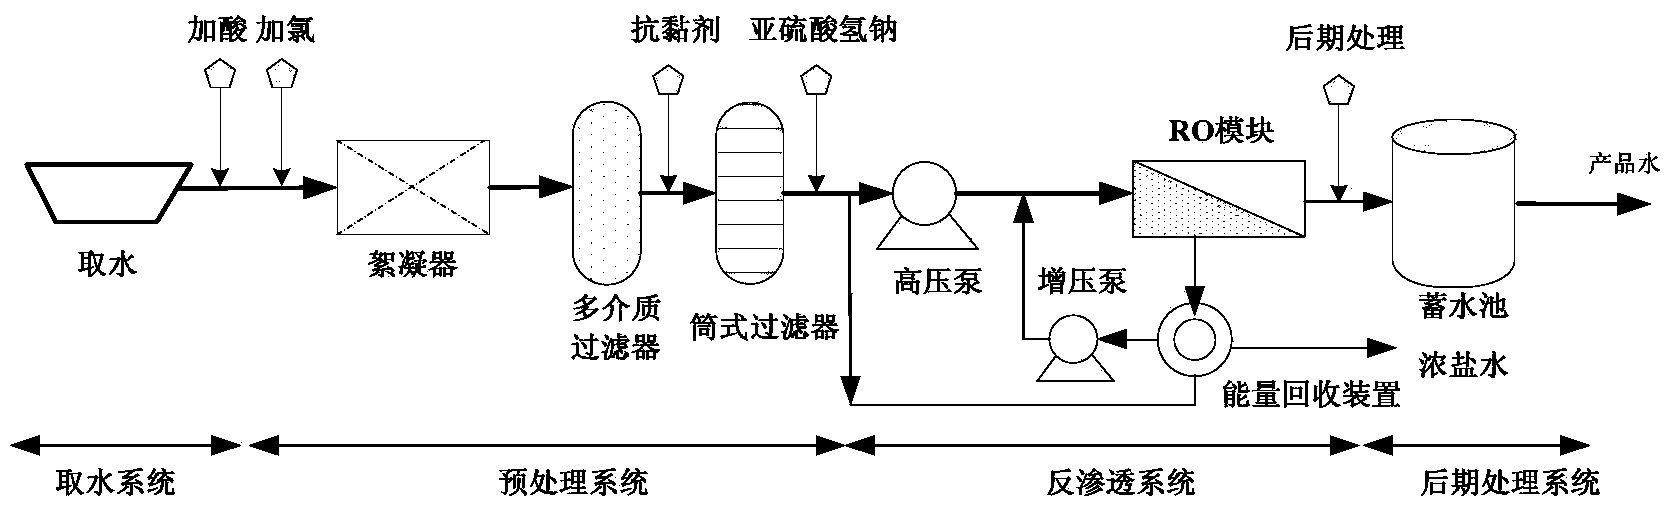 Operation optimization method of full flow roll type reverse osmosis seawater desalination system